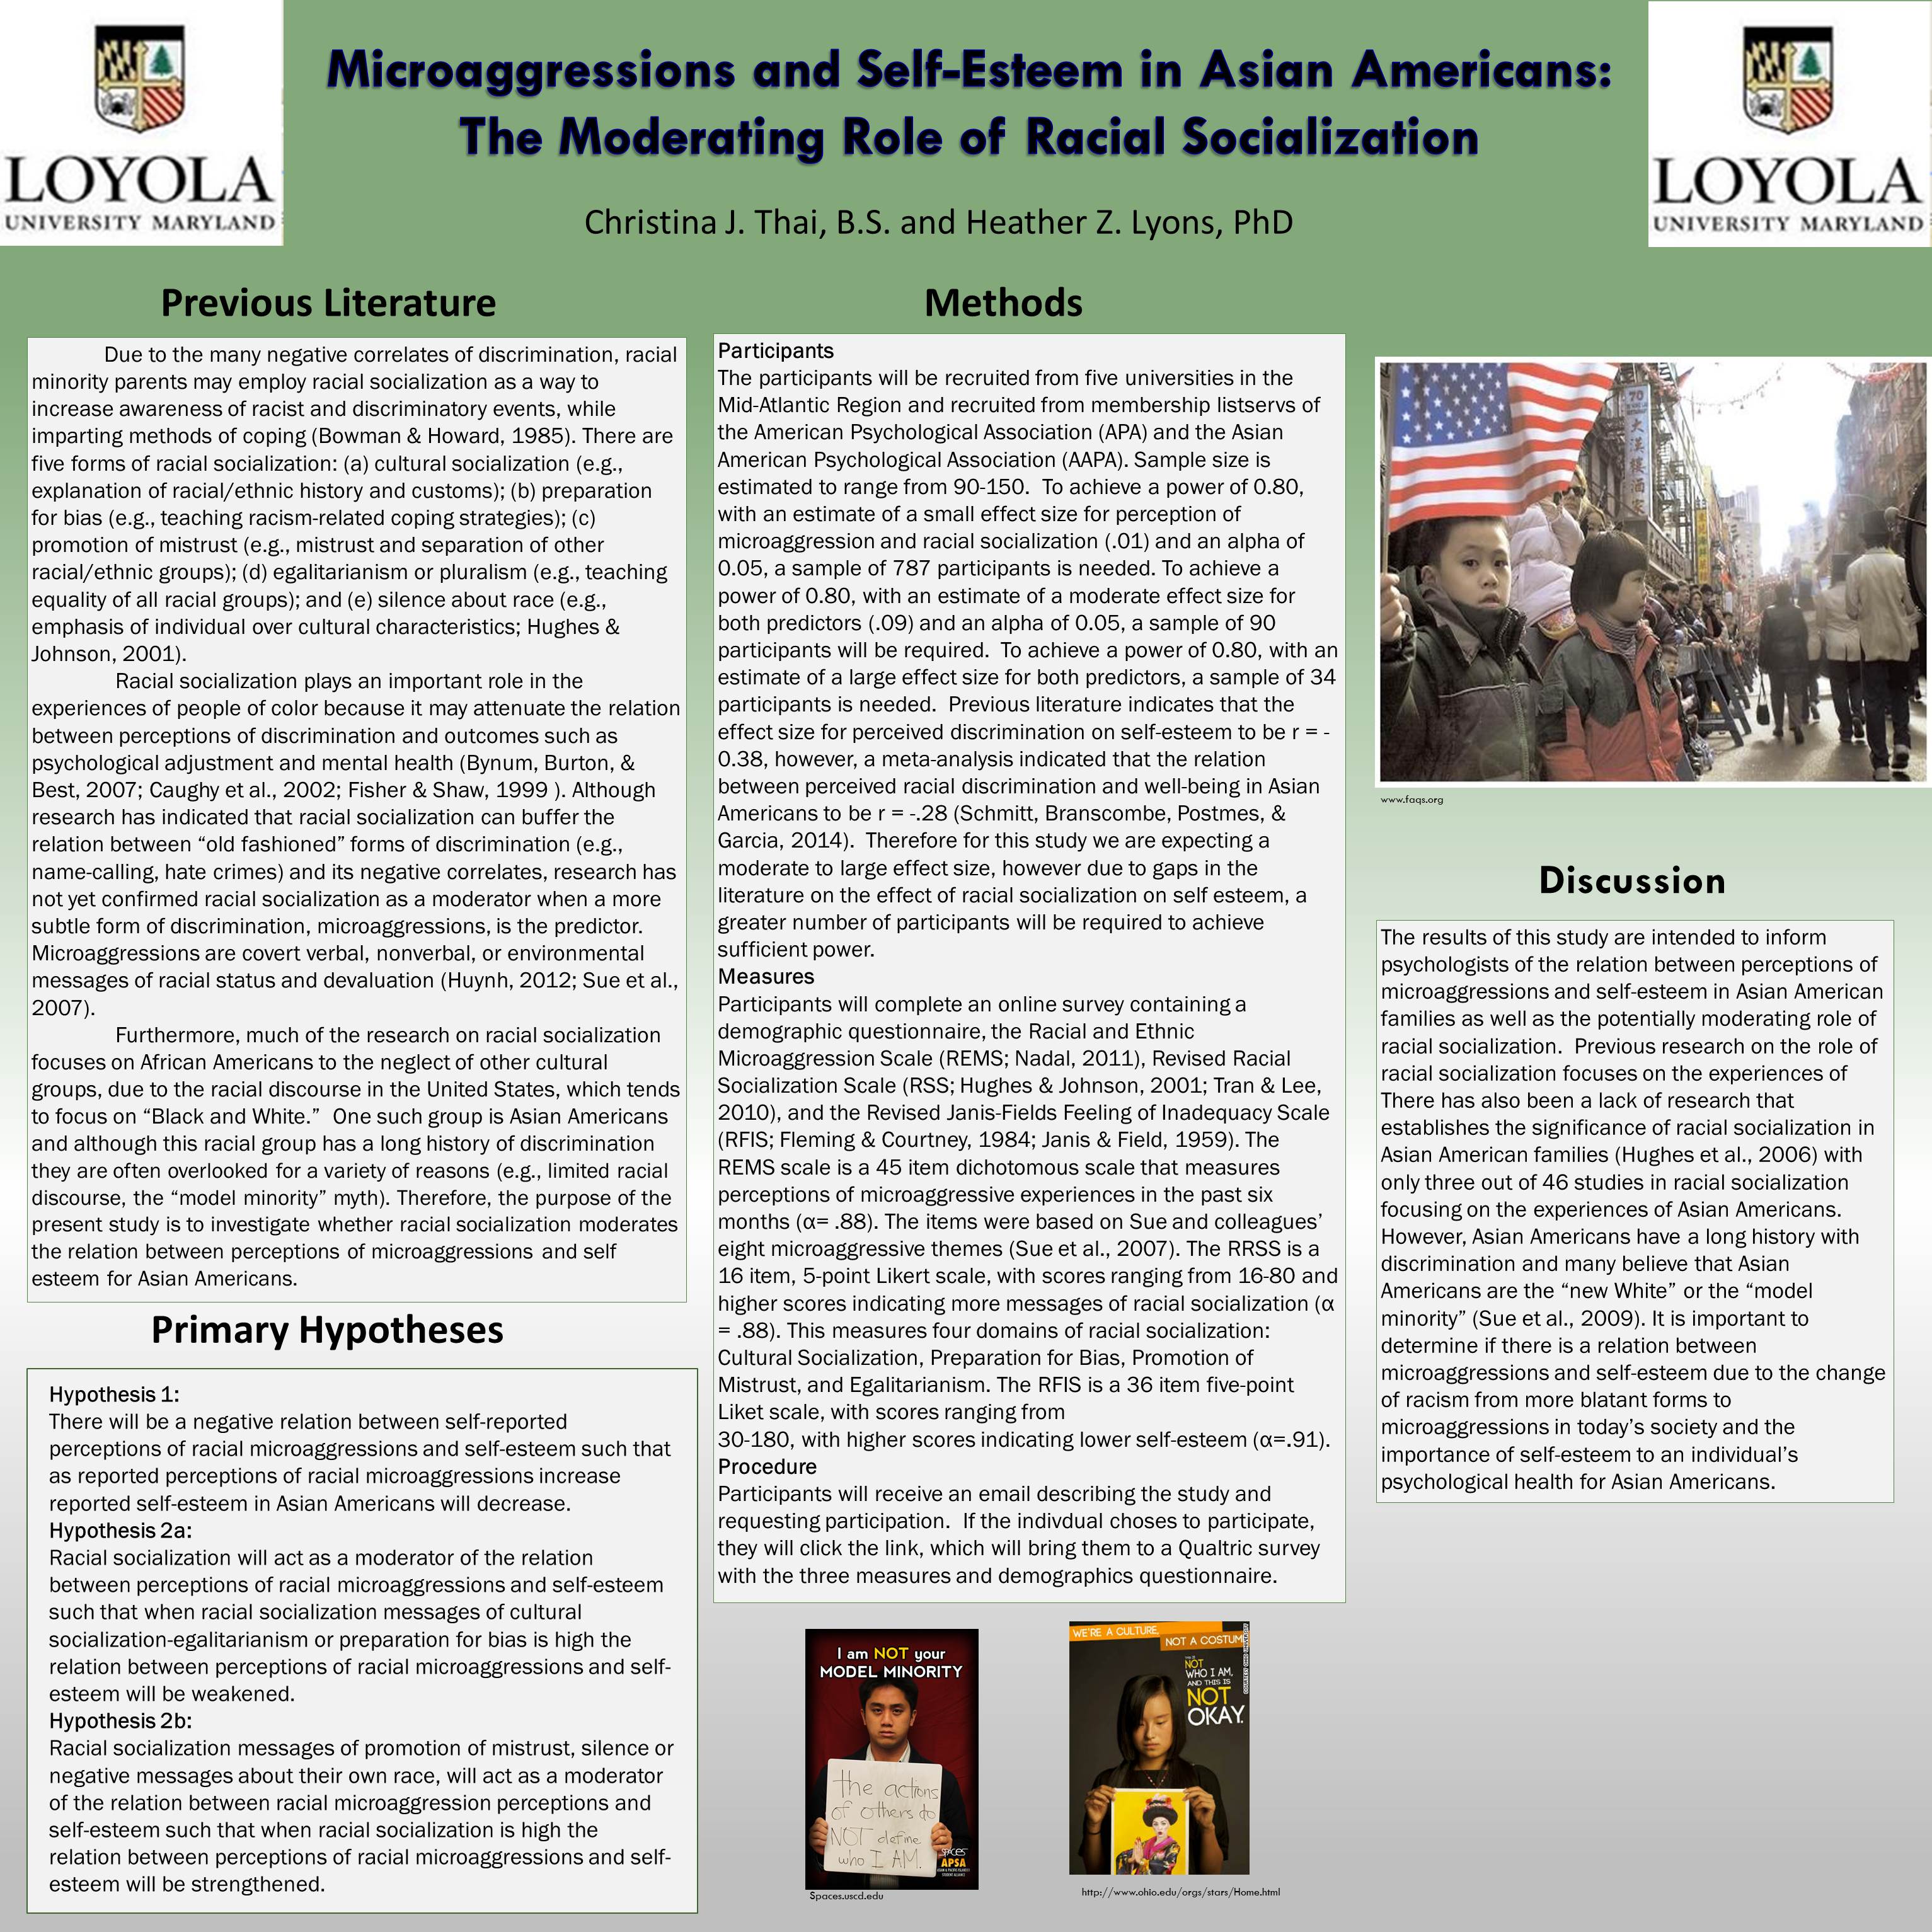 poster image: 'Microaggressions and Self-Esteem in Asian Americans: The Moderating Role of Racial Socialization'